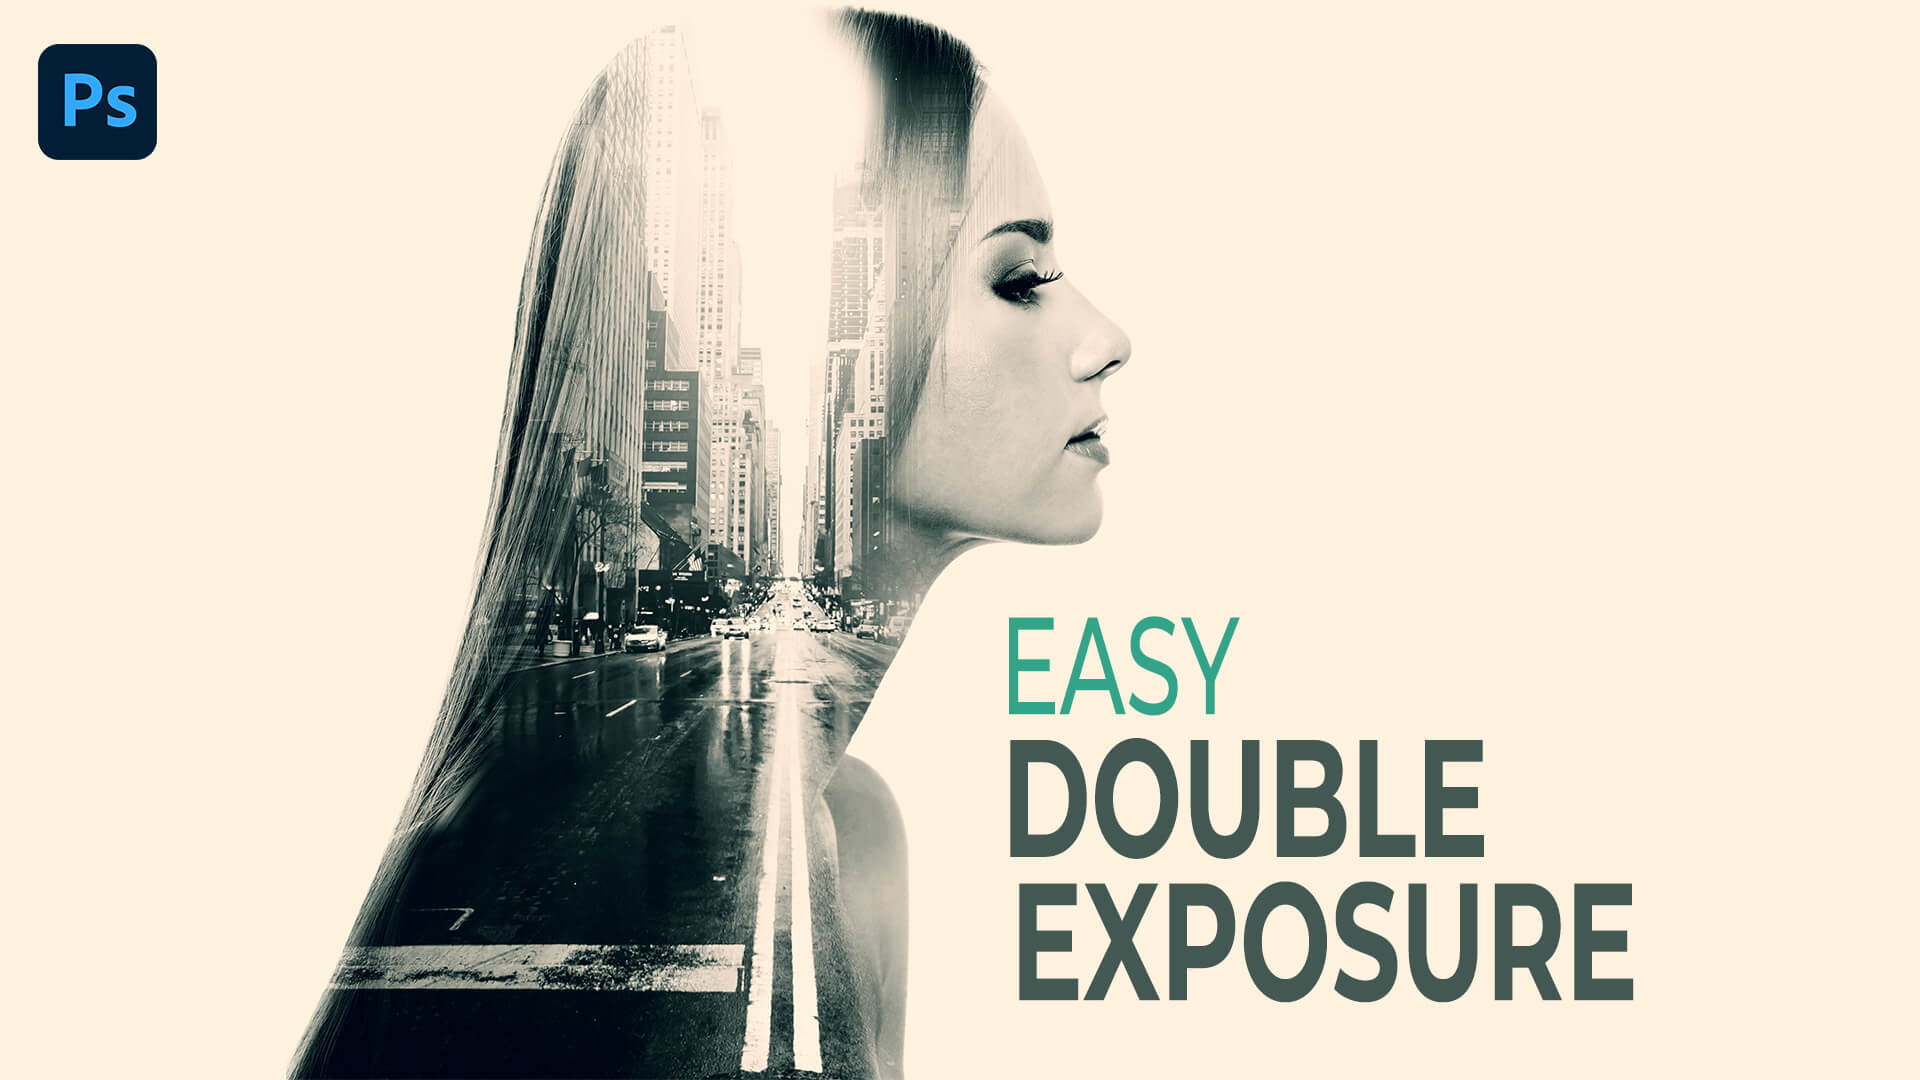 How to Make Easy Double Exposure in Photoshop